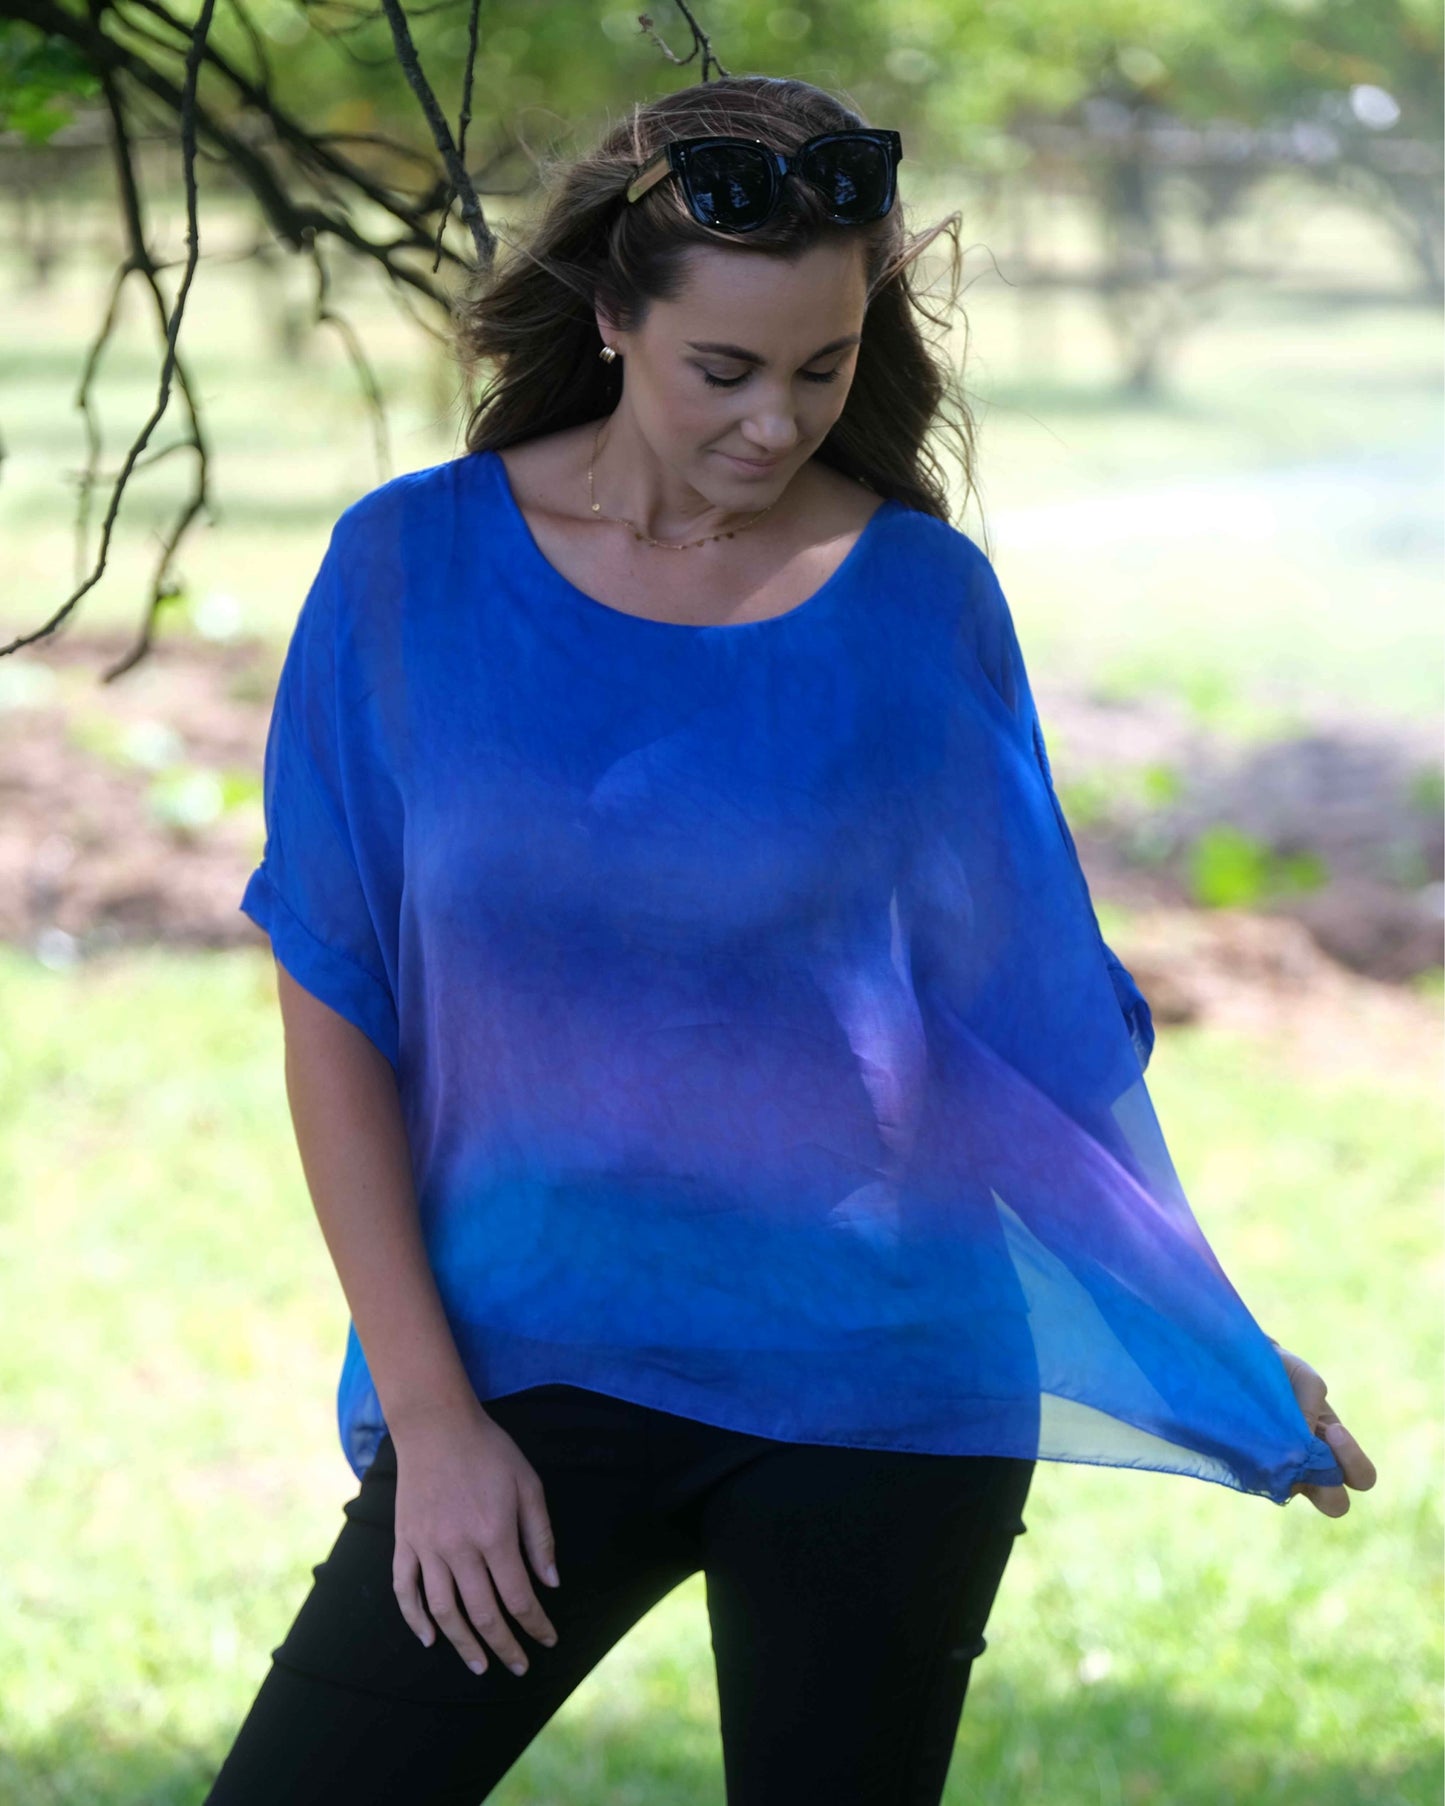 We know our clients adore these type of styles. Stunning ombré colors with a cami insert – a masterpiece of design that seamlessly combines the timeless allure of silk blend with a modern twist. This top is your gateway to effortless elegance, comfort, and a touch of vibrant ombré magic